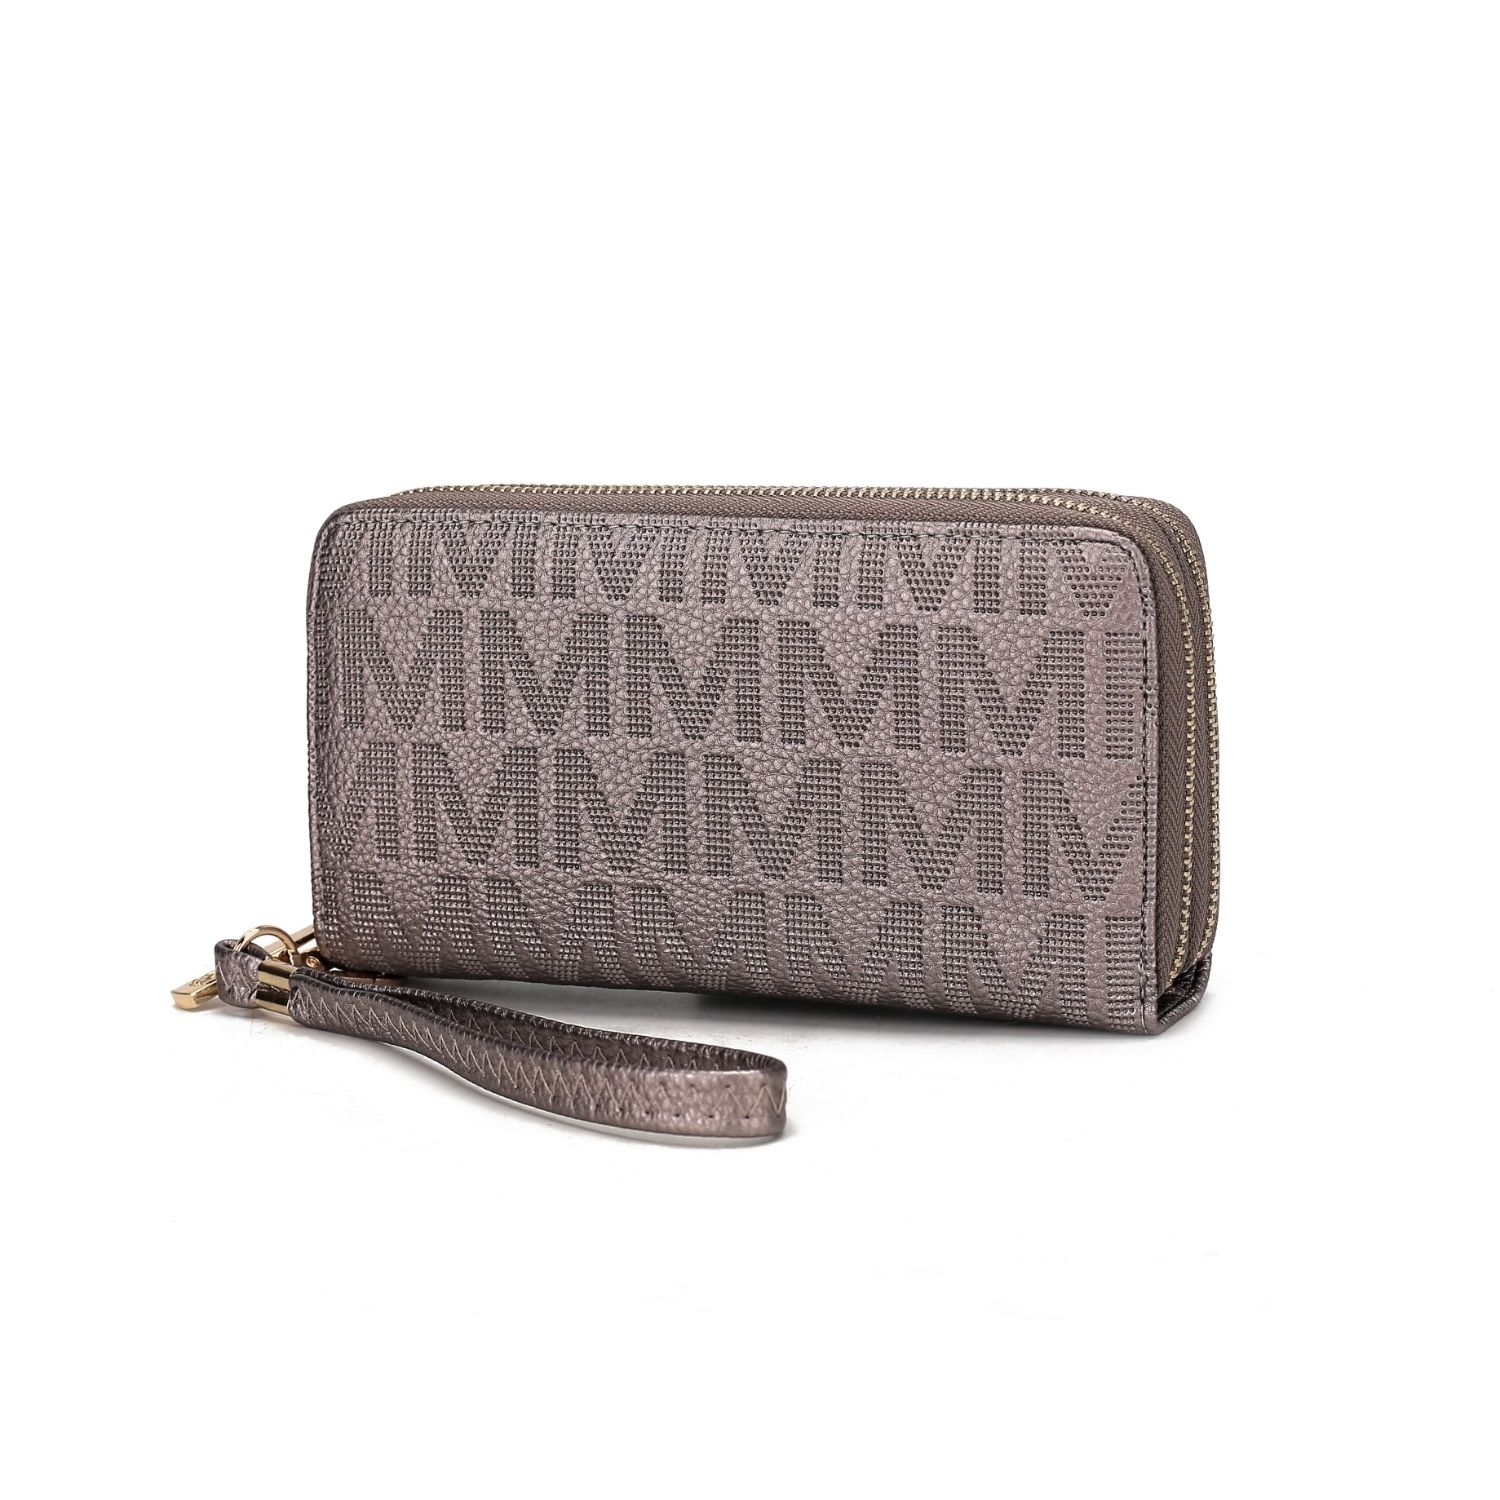 MKF Collection Lisbette Embossed M Signature Wallet By Mia K. Handbag - Pewter